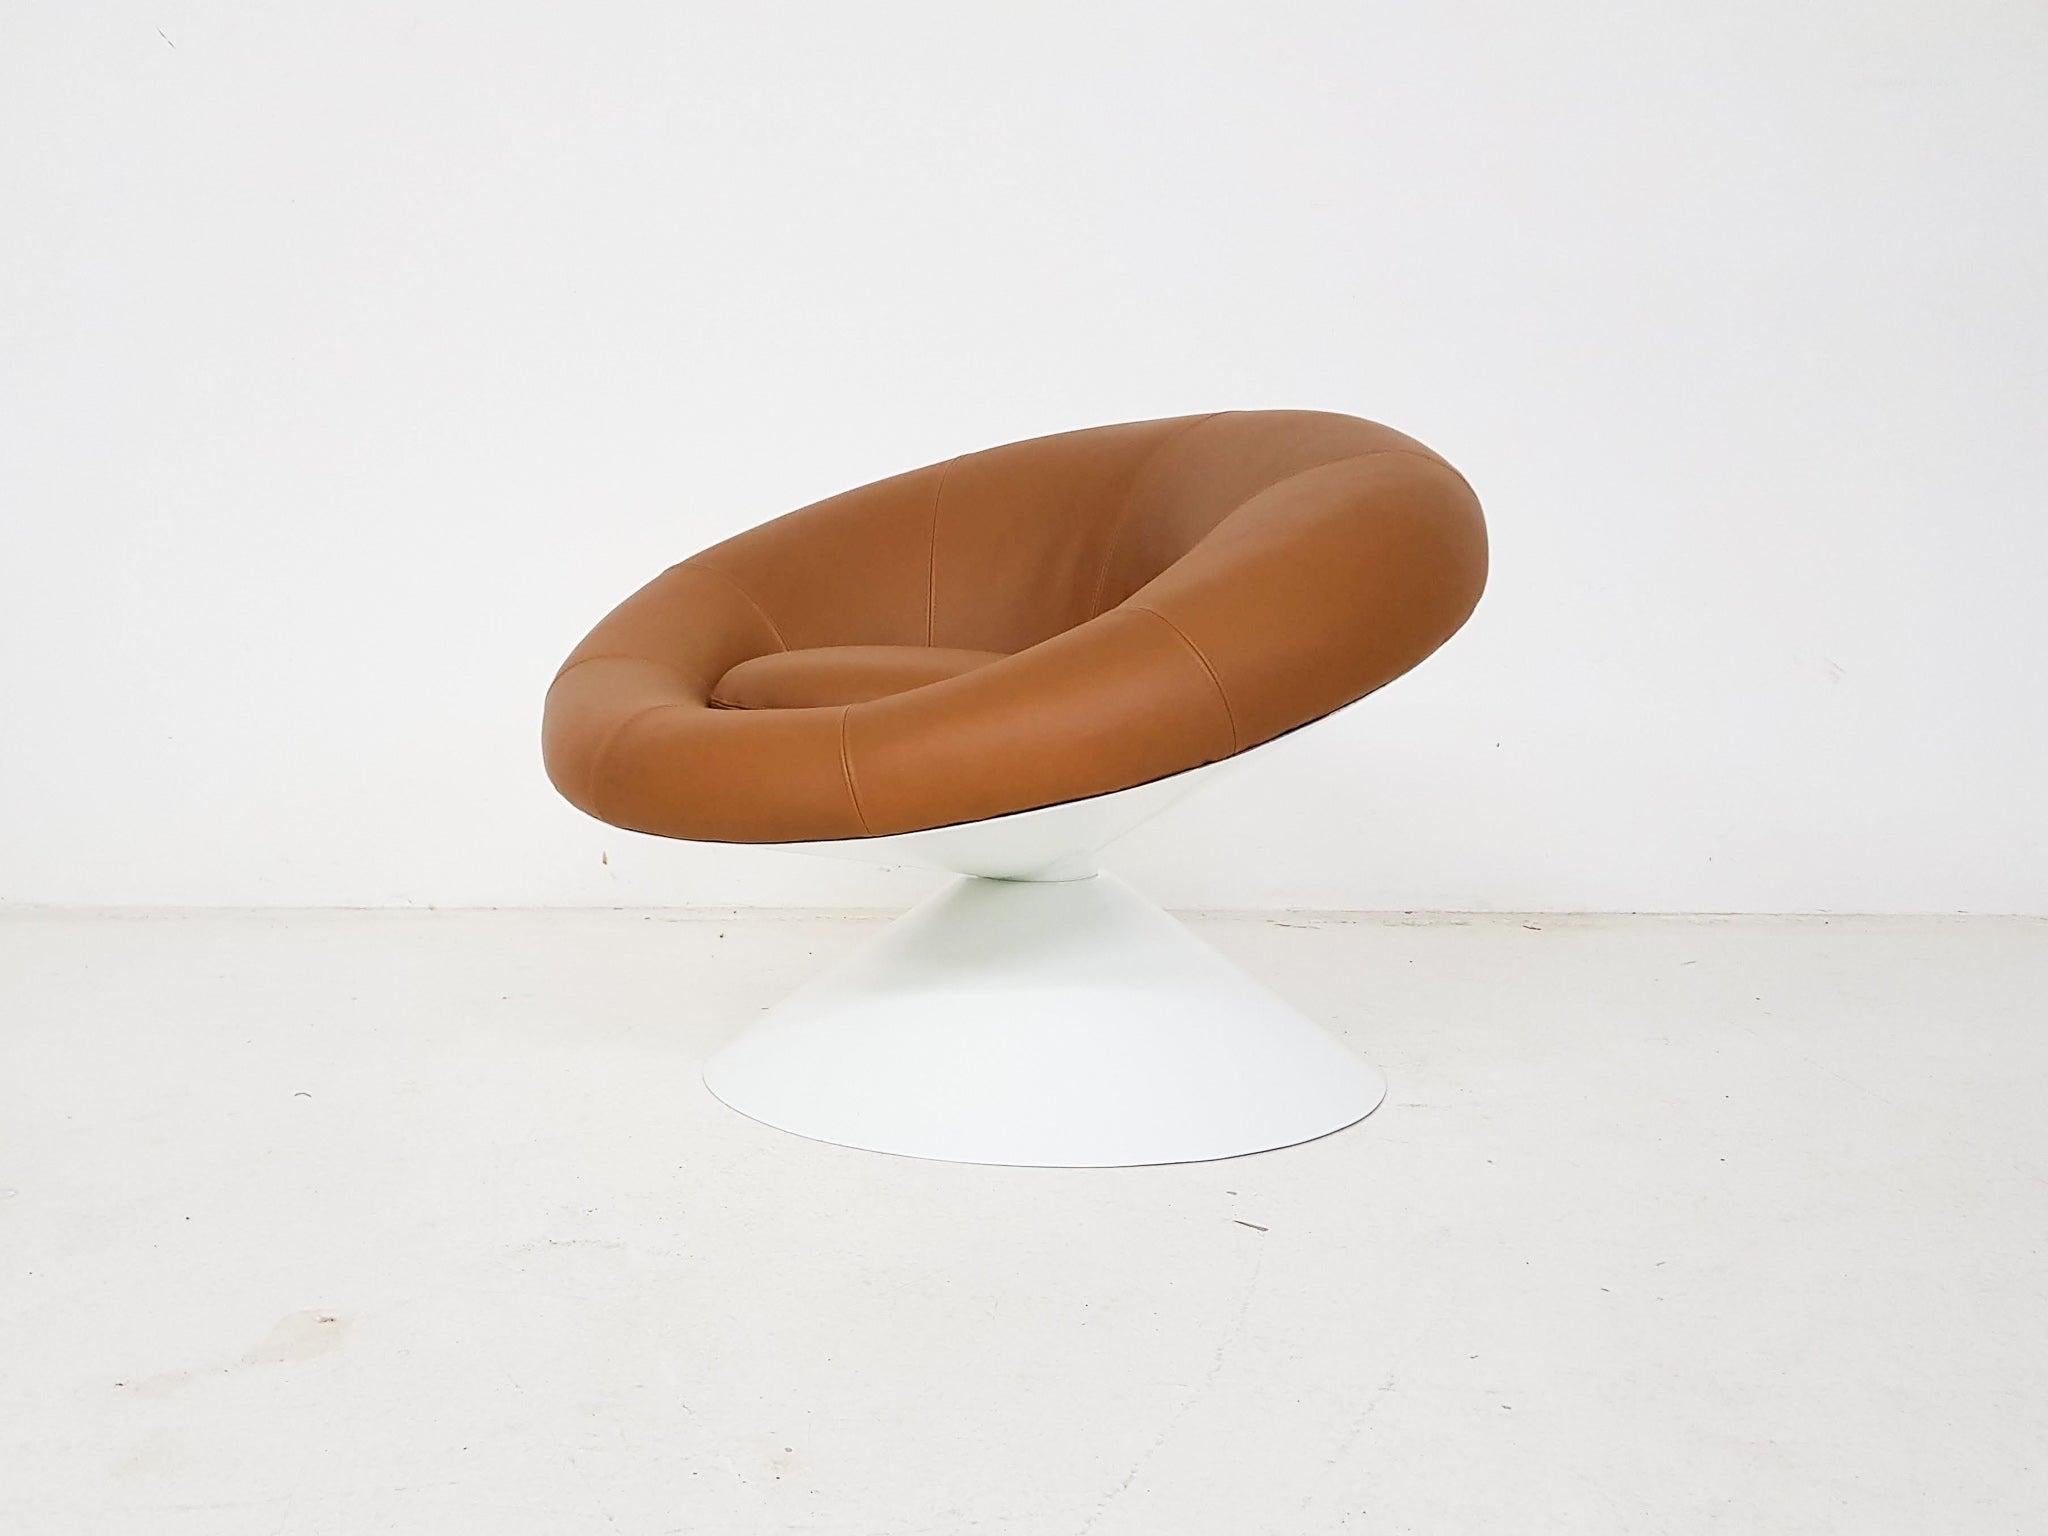 This beautiful piece of mid-century furniture is called the “Diabolo” lounge chair. A highly rare and exclusive lounge chair made by Stabin Bennis The Netherlands and designed by Dutch designer Ben Swildens in the 1960’s.

The name diabolo is